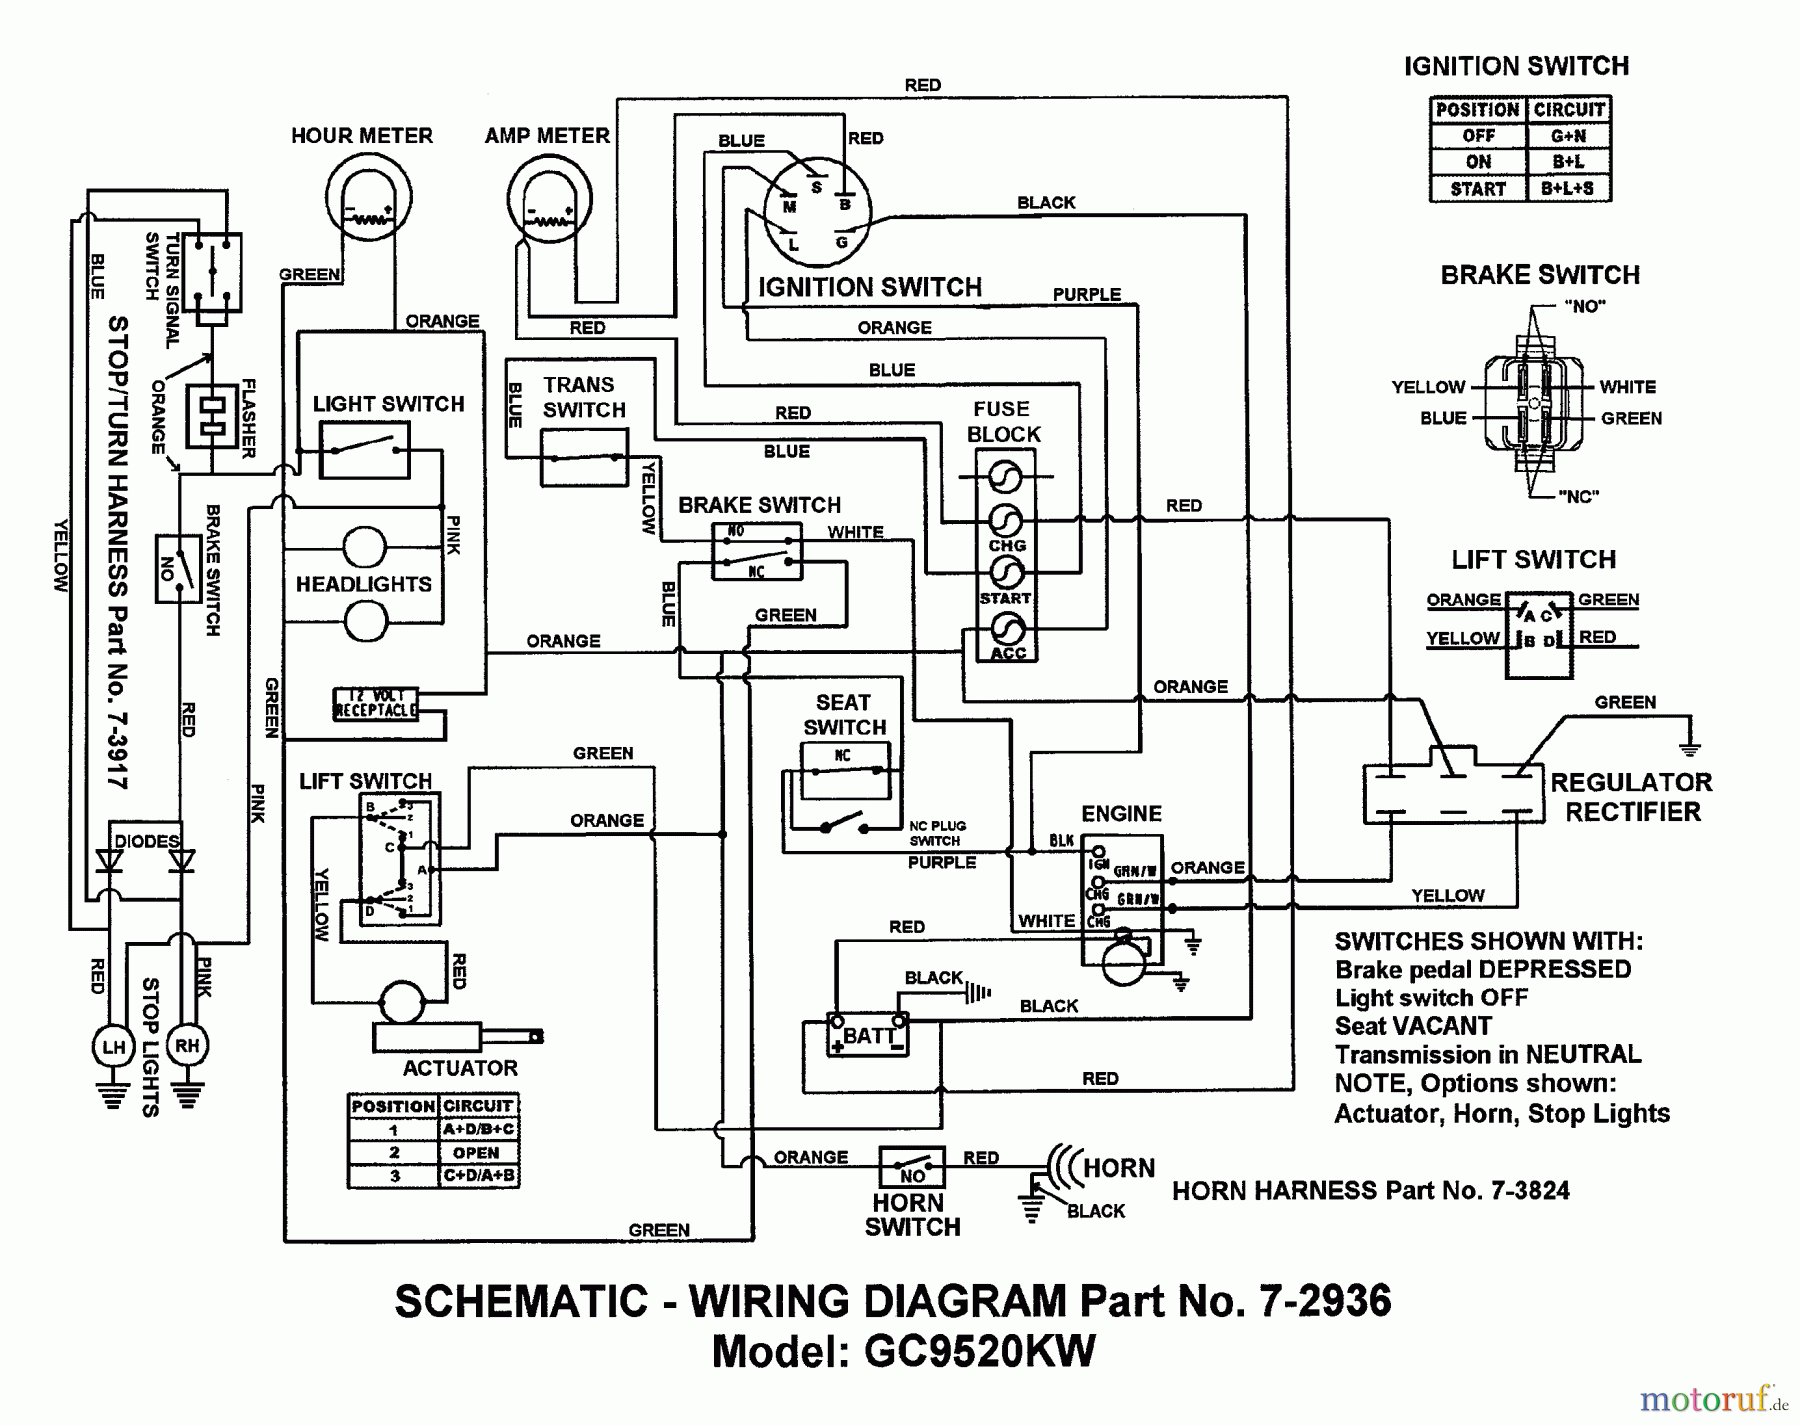  Snapper Utility Vehicles GC9520KW (84449) - Snapper 2x2 Grounds Cruiser Utility Vehicle, 9.5 HP, Series 0 Wiring Schematic P/N 72936